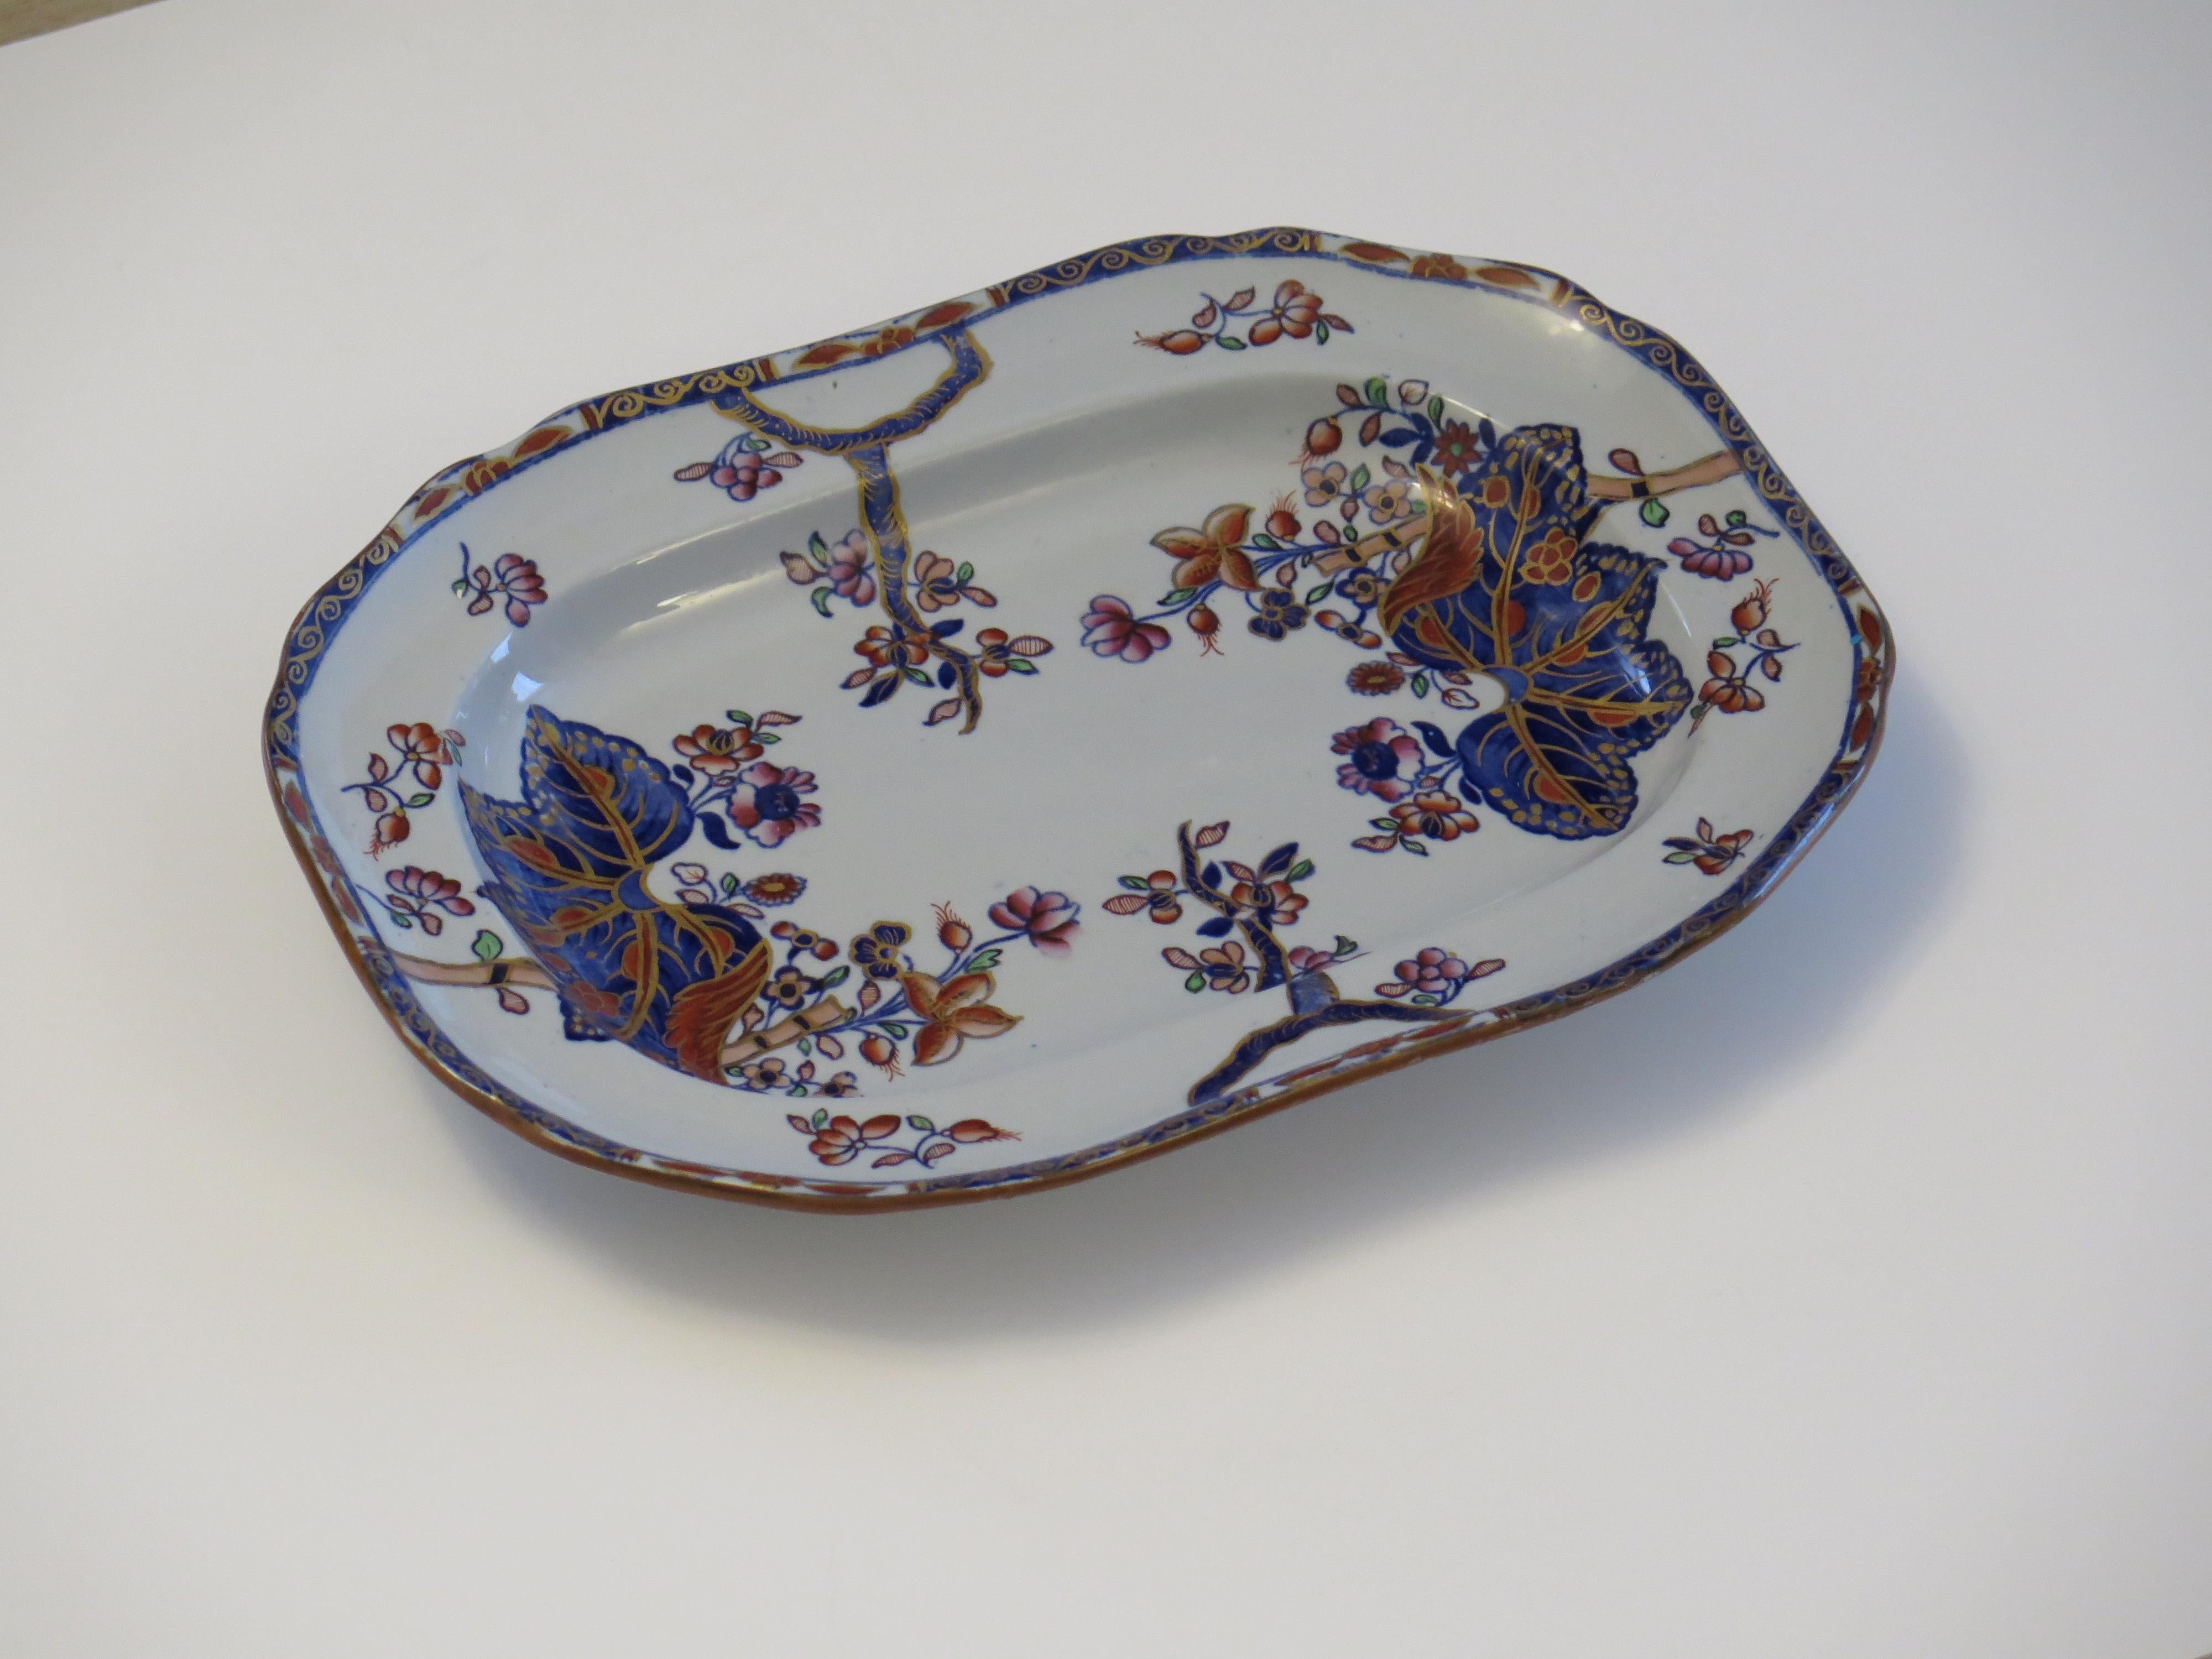 This is a good antique stone China (Ironstone)  Serving Dish or Platter, in the hand - painted Tobacco Leaf pattern number 2061, made by the Copeland Late Spode factory during the mid 19th century.

The platter or Dish is well potted, fairly deep,